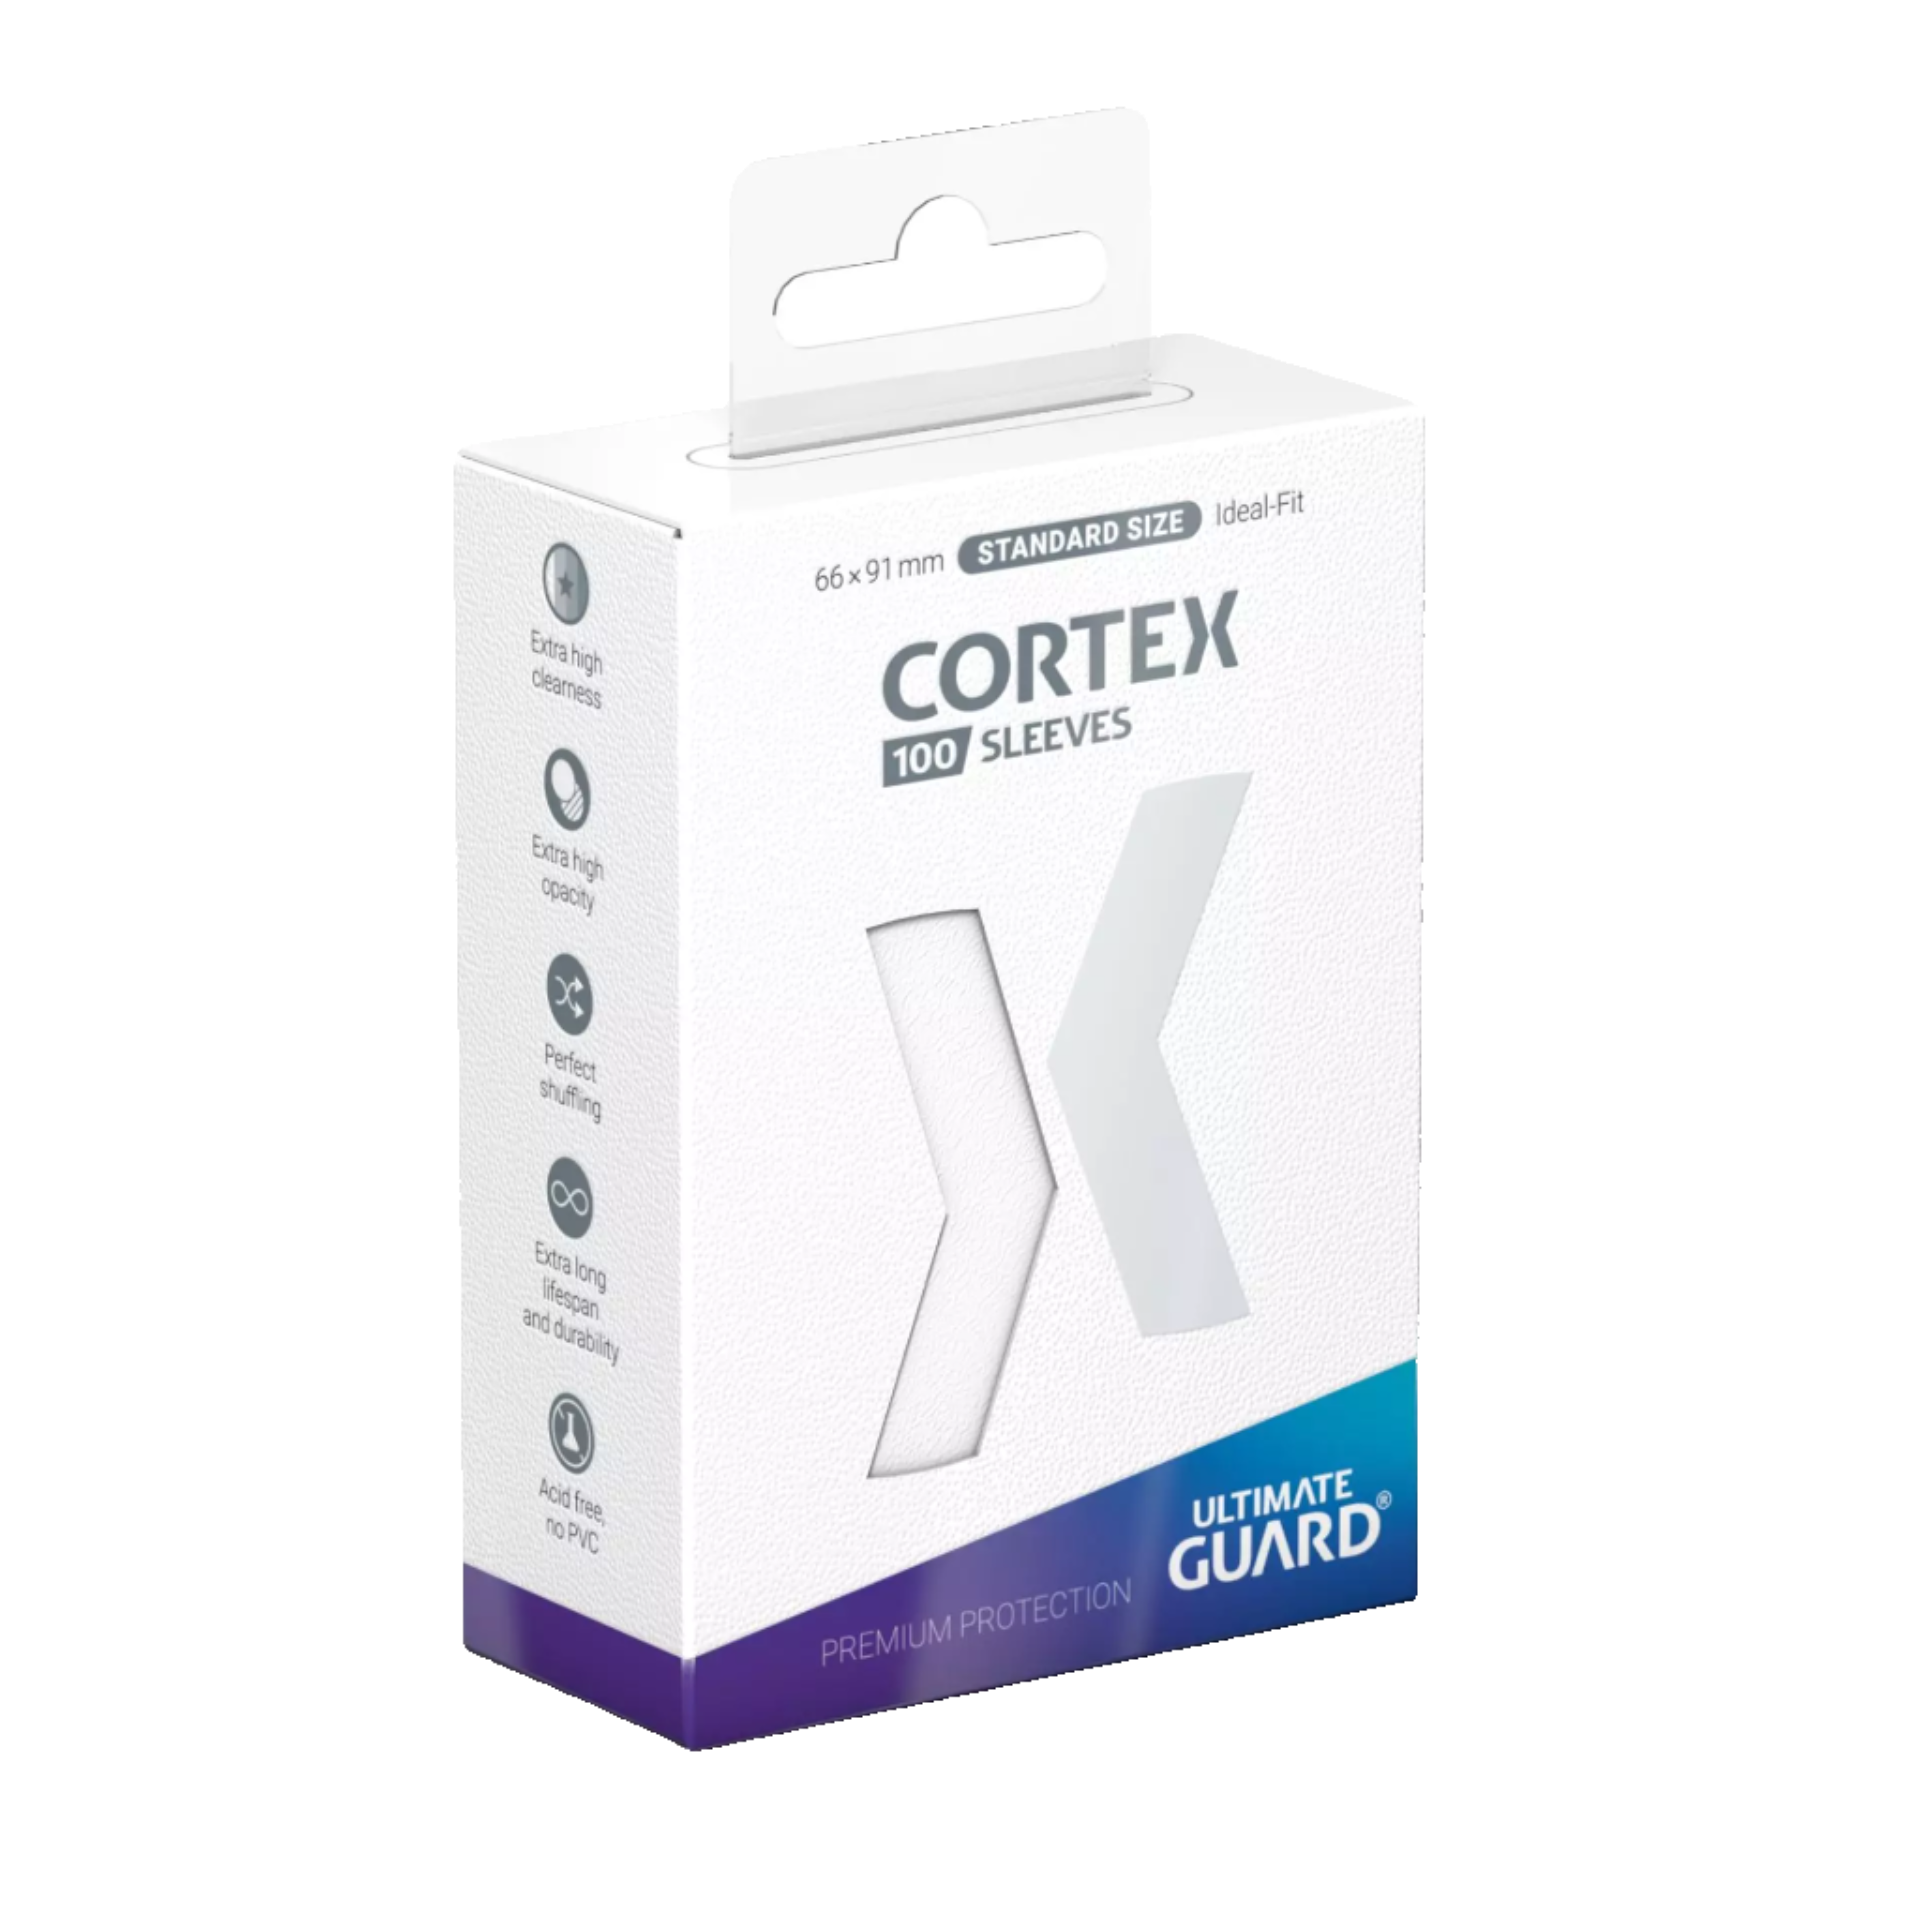 Ultimate Guard - Cortex Sleeves - Standard Size - Ideal-Fit - White - 100pk